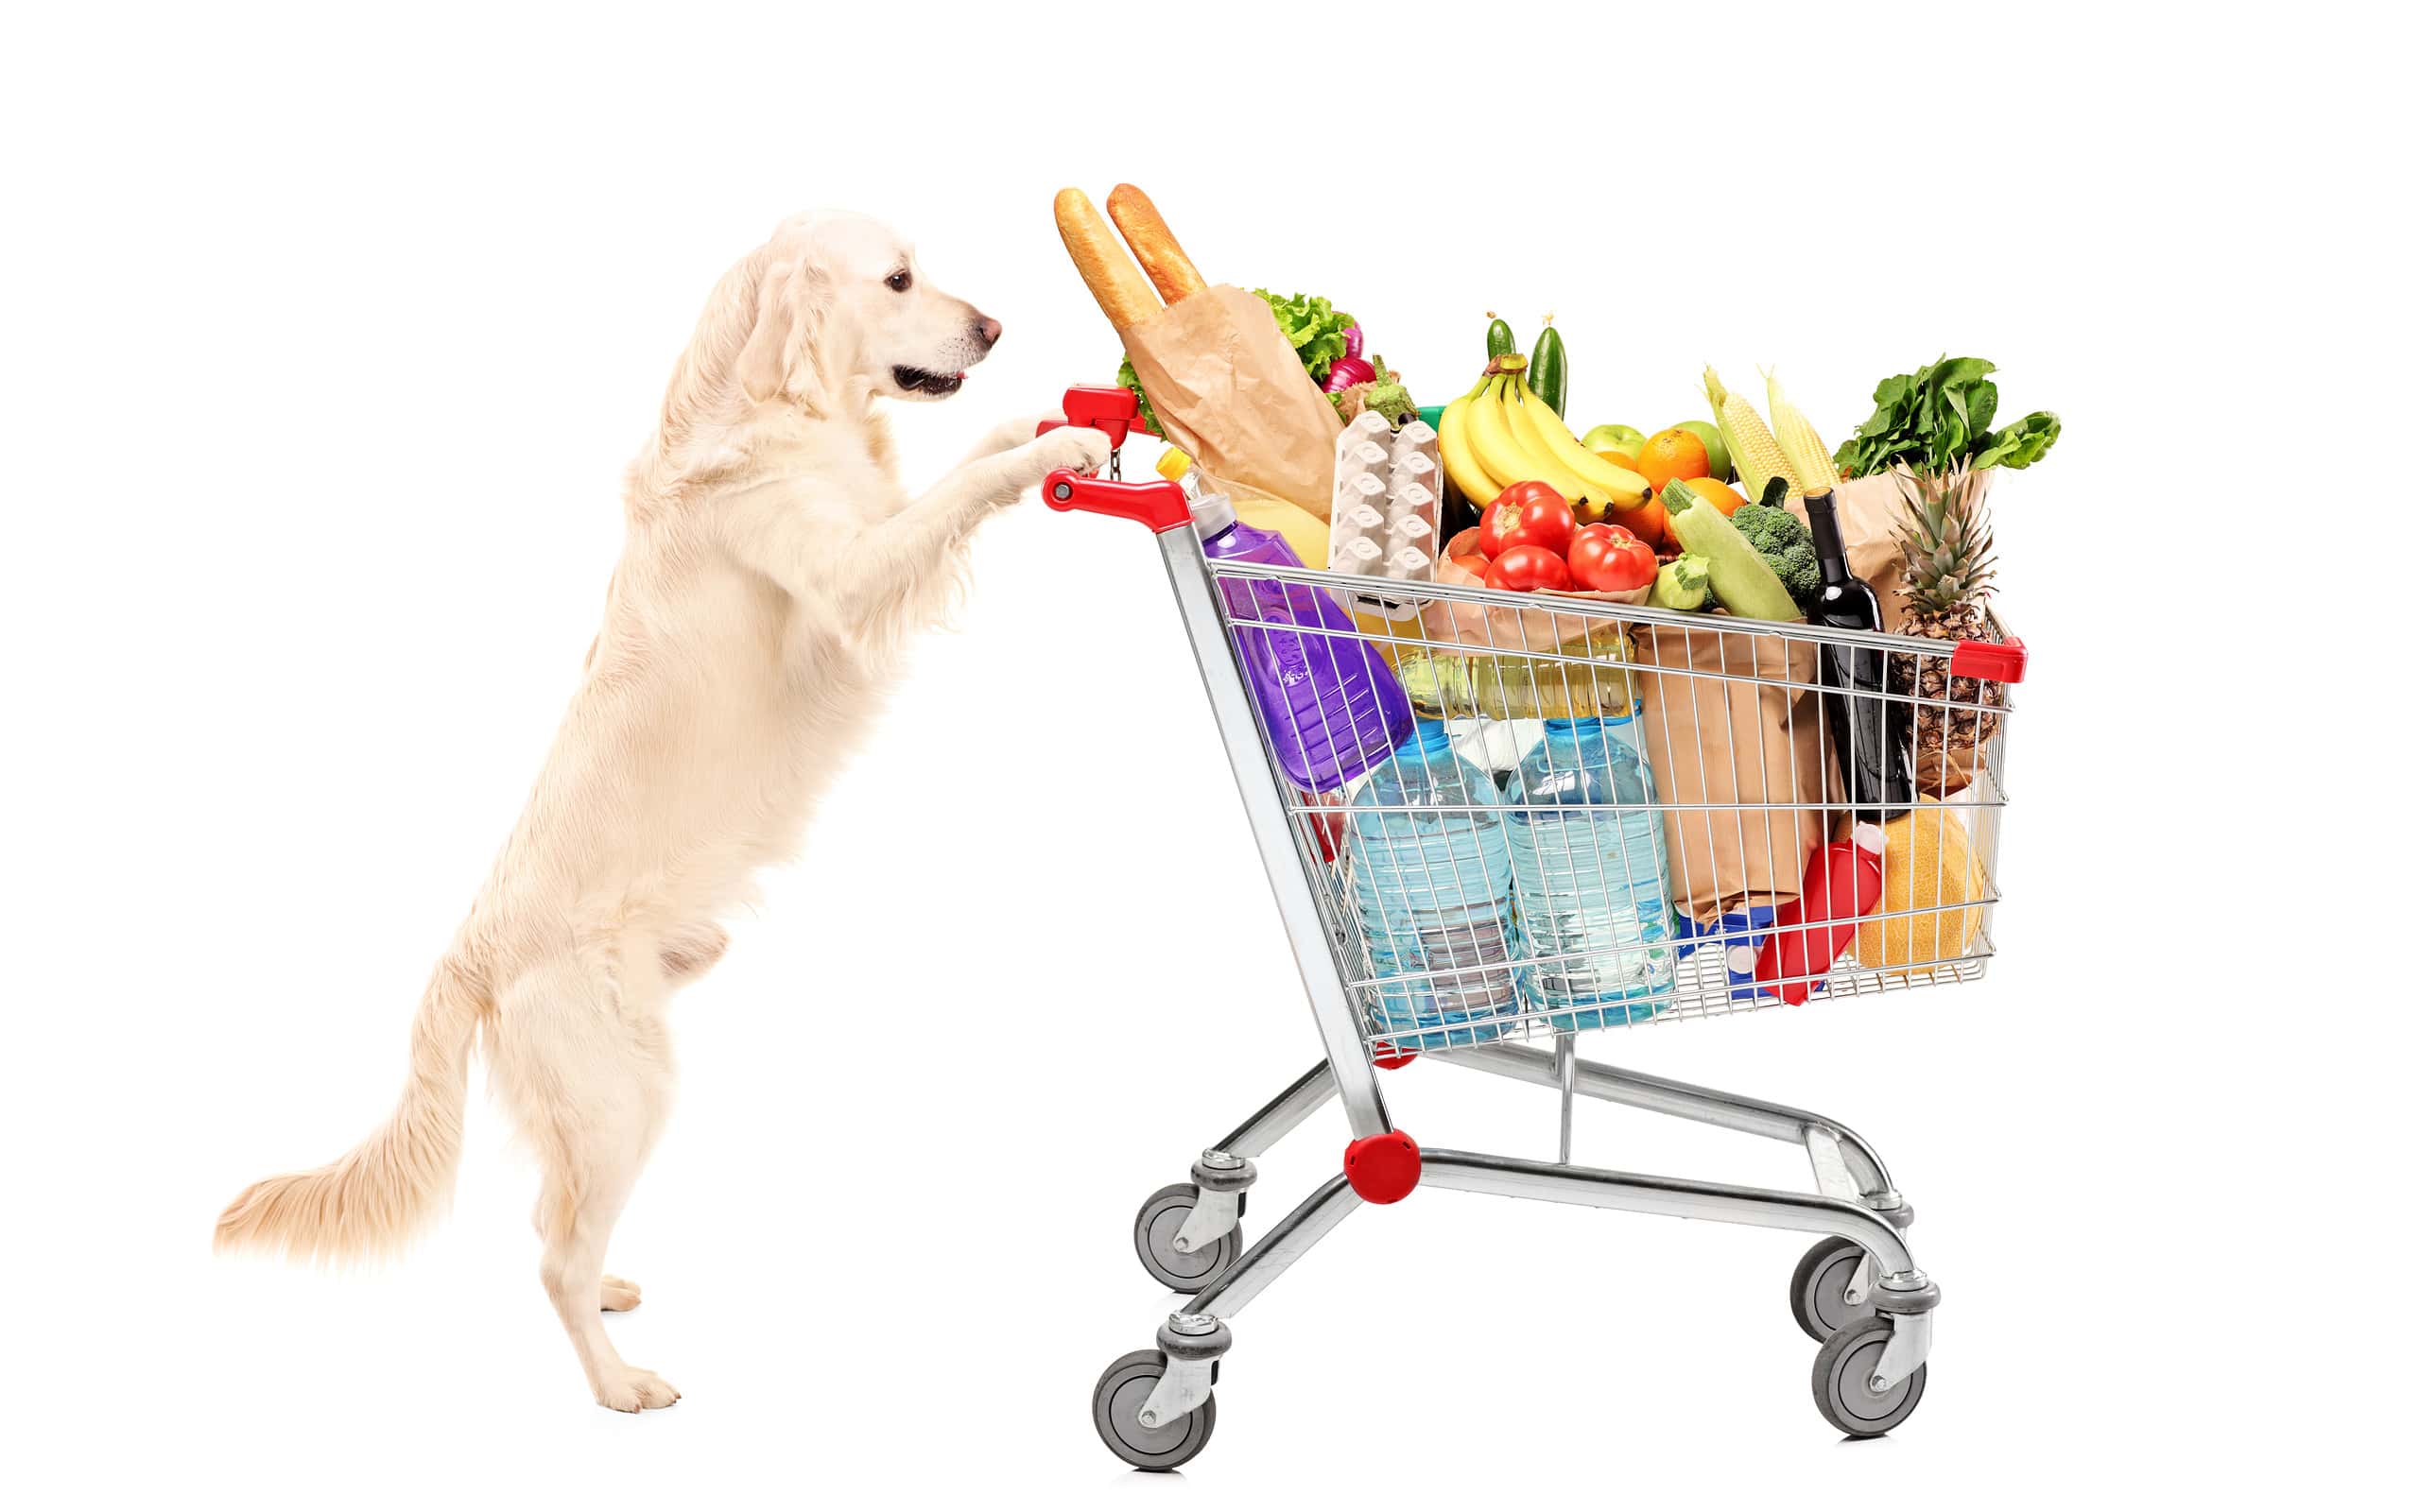 Funny retriever dog pushing shopping cart full of food product. Dogs in grocery stores.